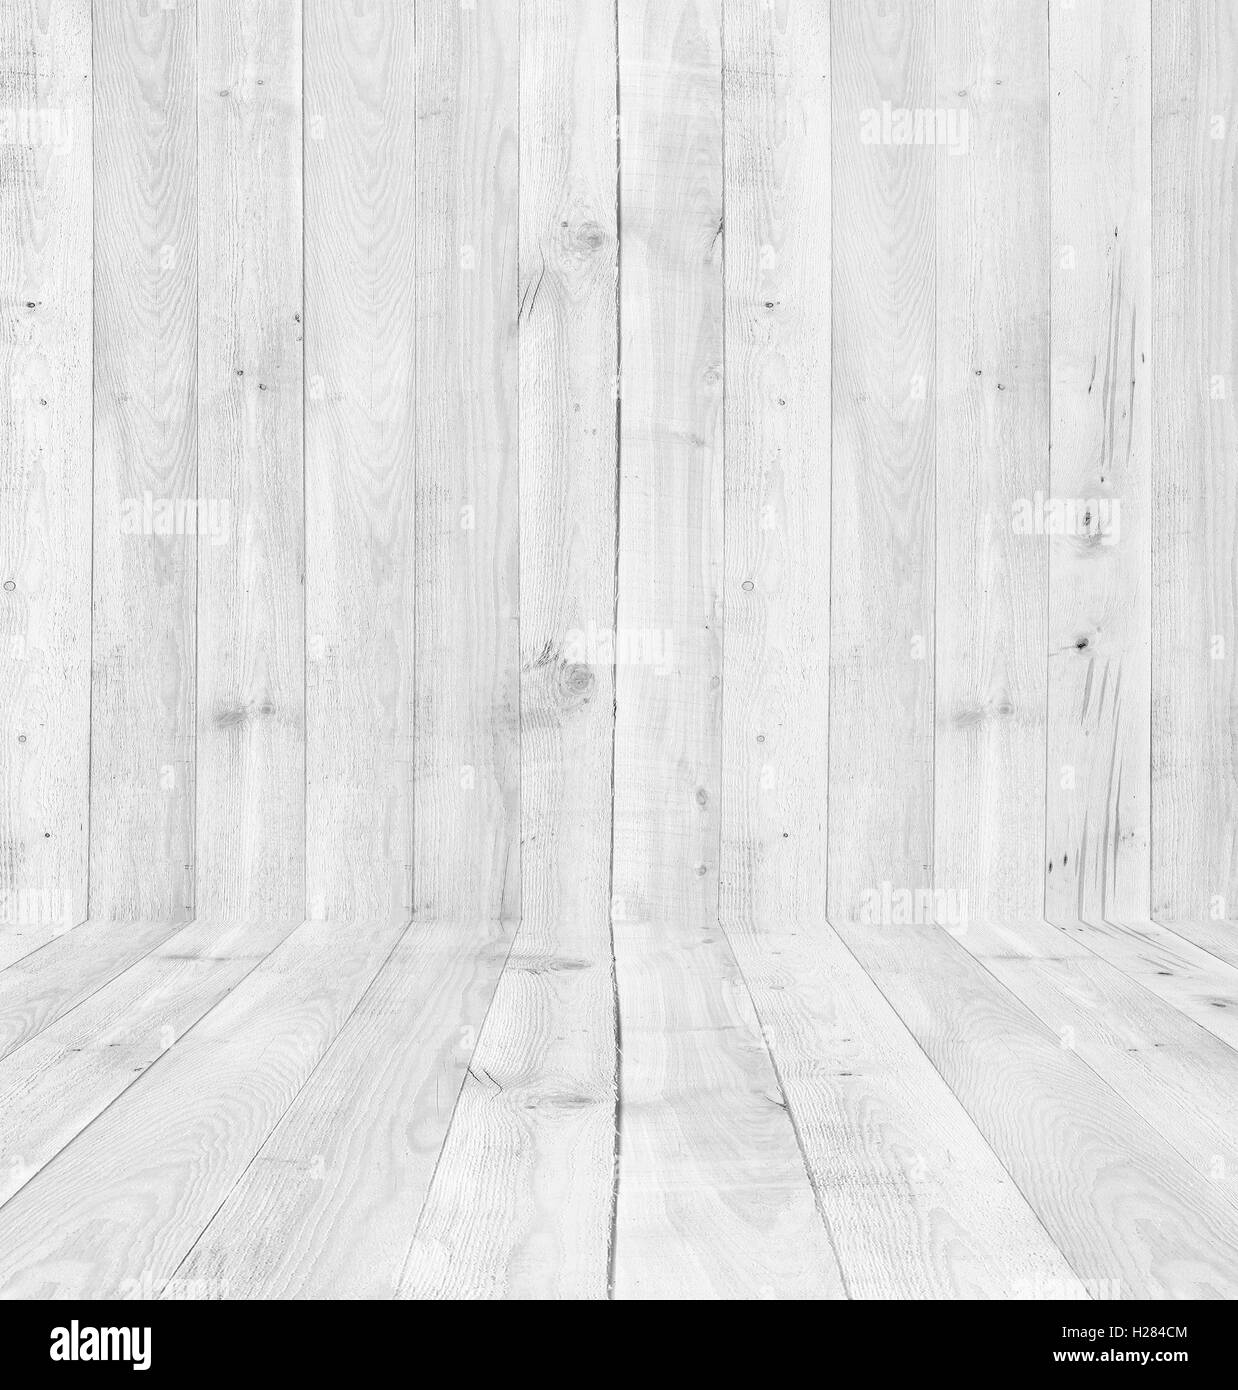 Oak wood furniture Black and White Stock Photos & Images - Alamy